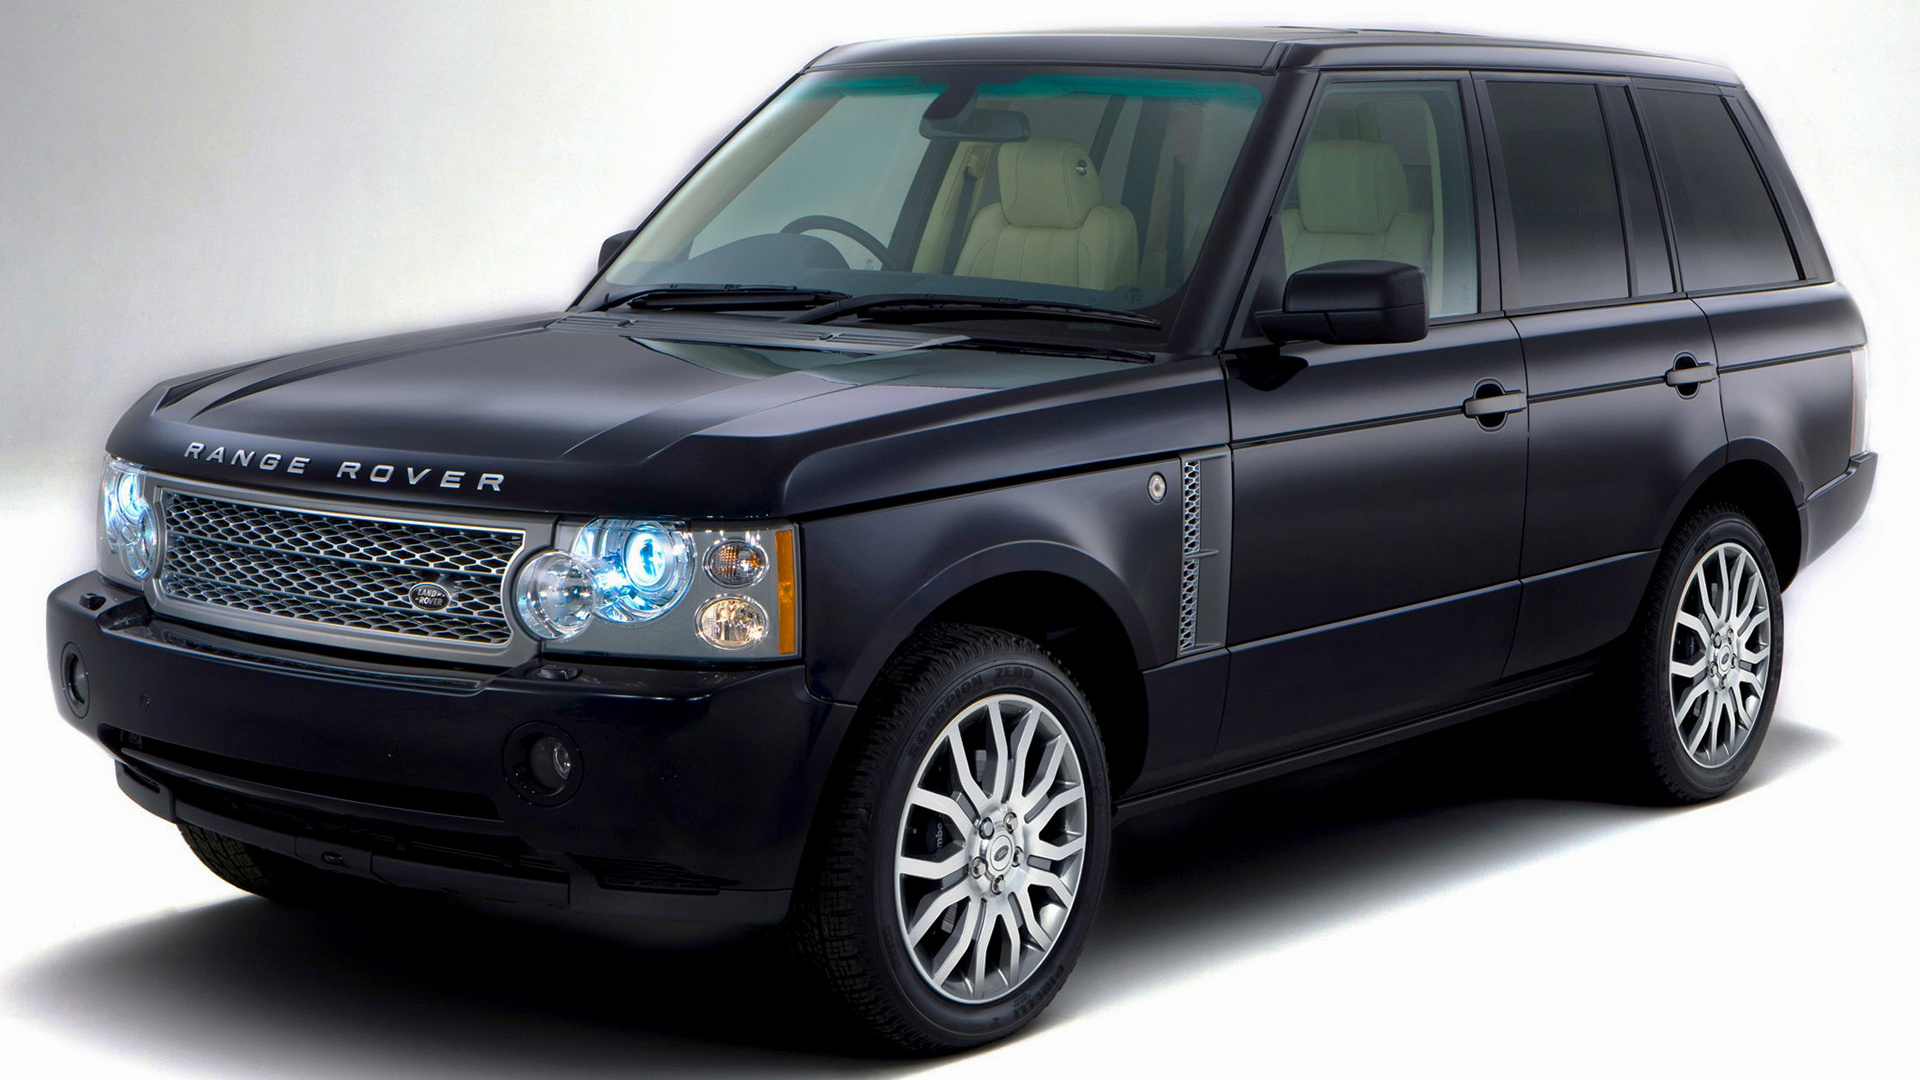 2008 Range Rover Autobiography (UK) - Wallpapers and HD Images | Car Pixel